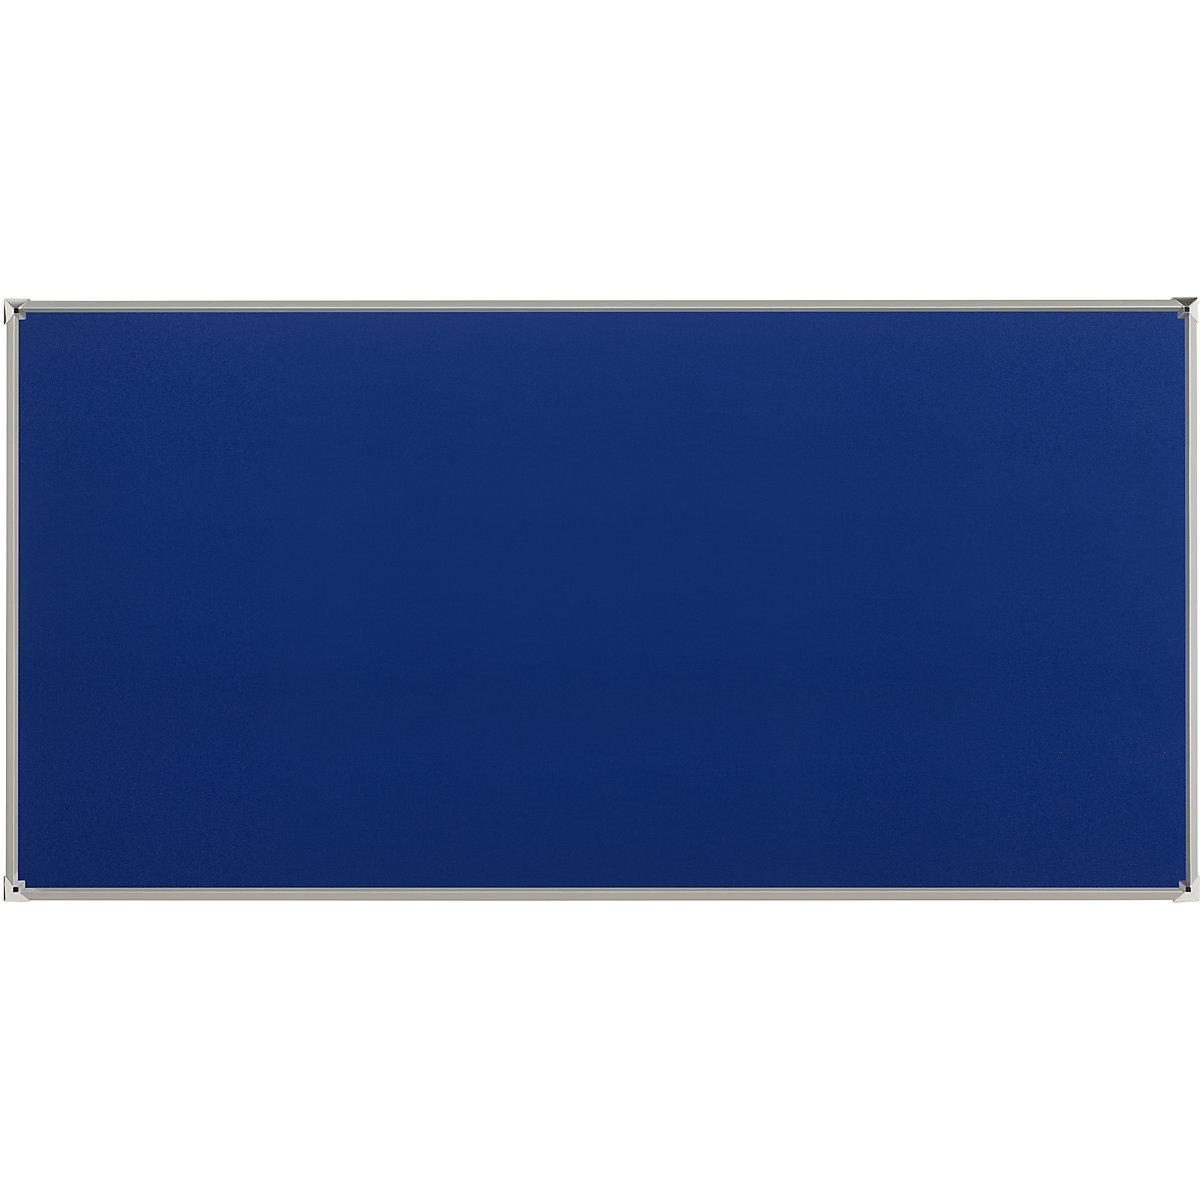 Pinboard with aluminium frame – eurokraft pro, fabric covering, blue, WxH 2400 x 1200 mm-6